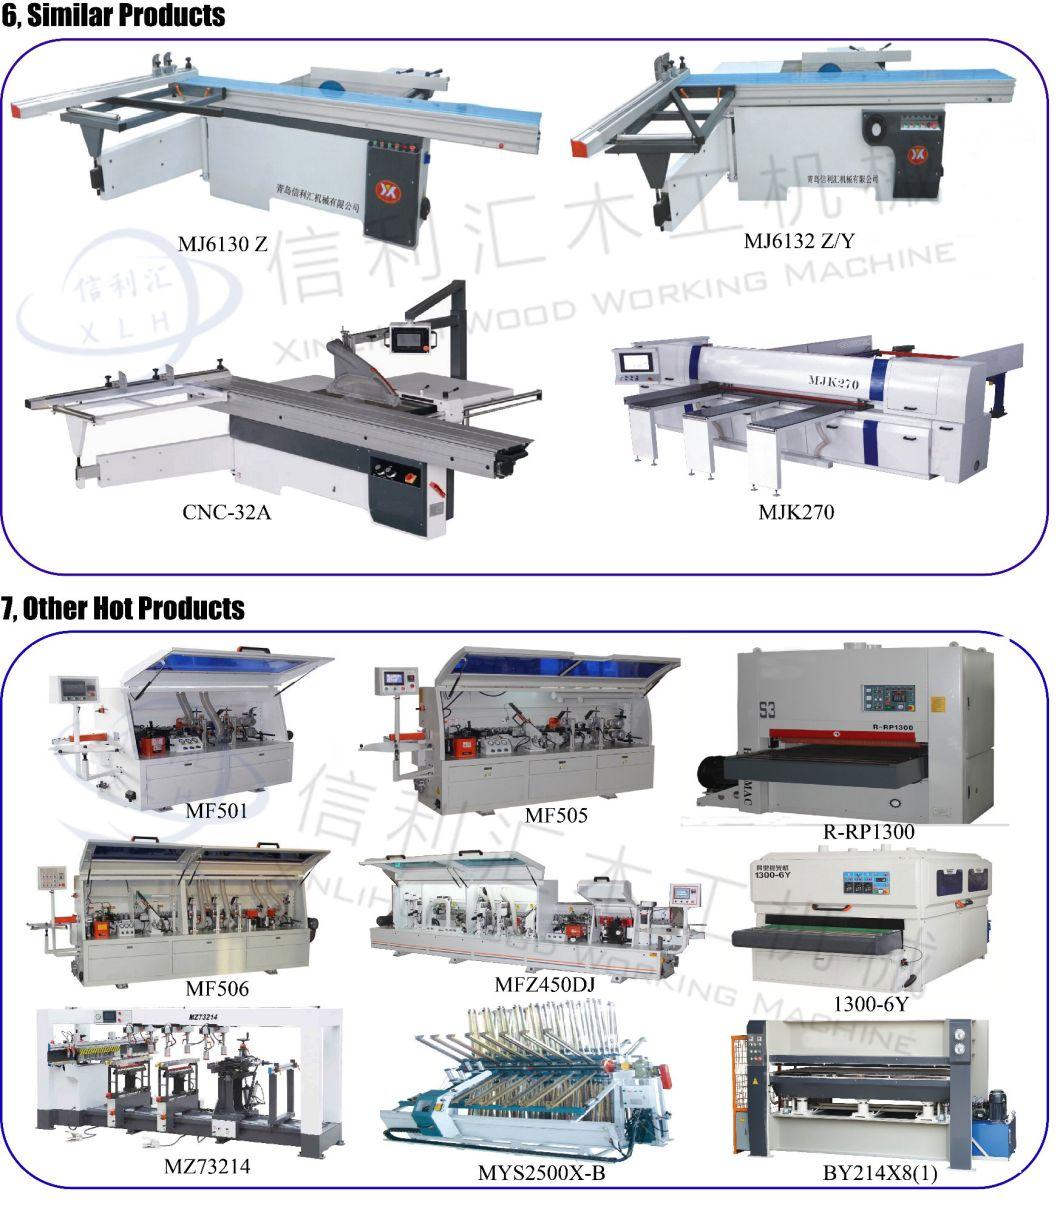 Multi-Purpose Woodworking Machine Sawmill Machinery Sliding Table Saw for Woodworking with Handles for Adjusting Height and Angles